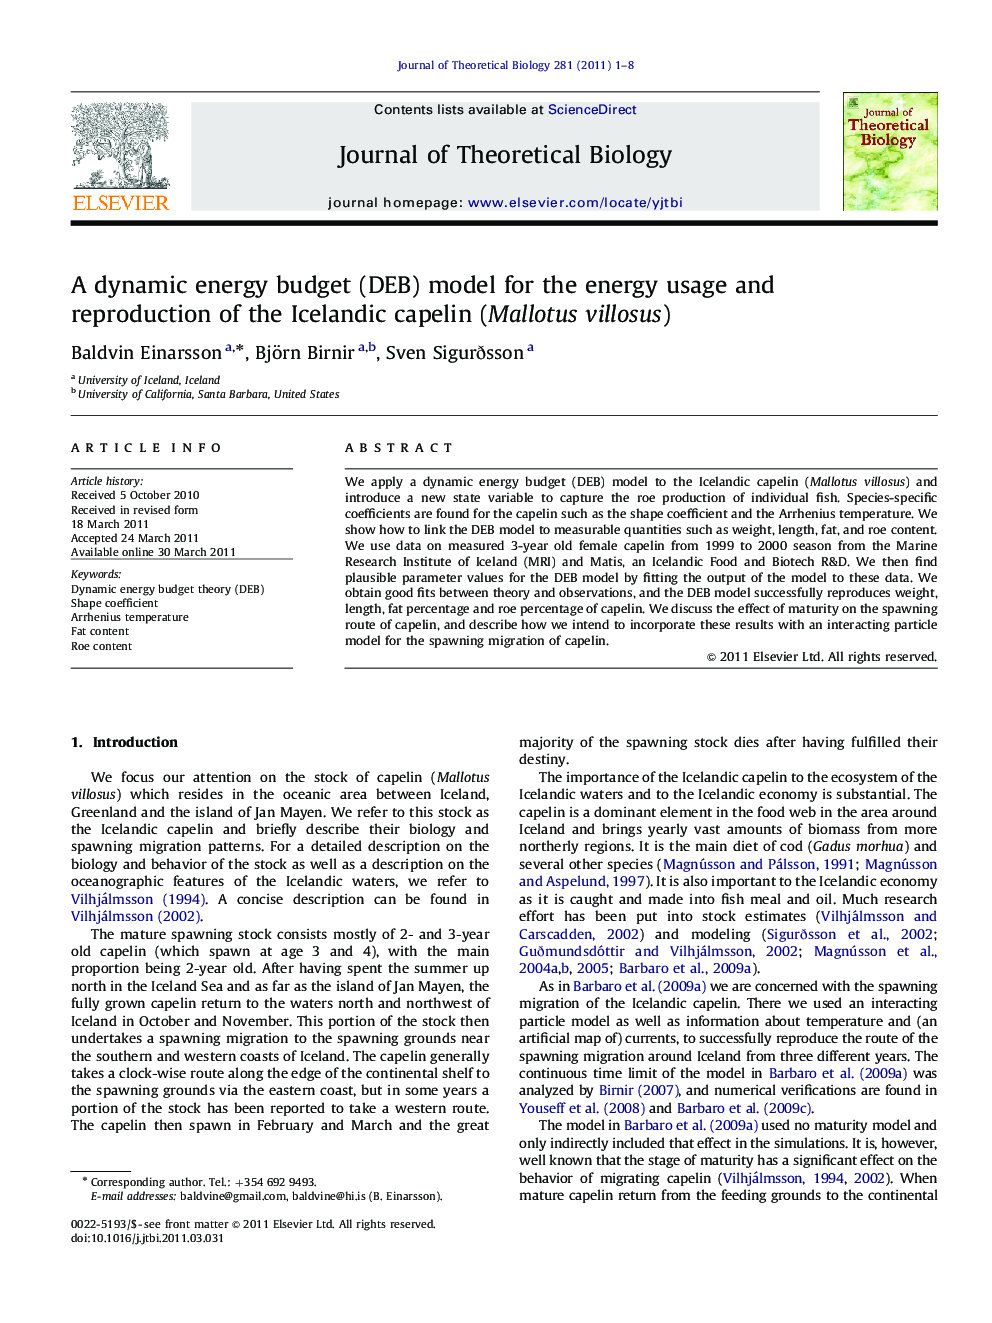 A dynamic energy budget (DEB) model for the energy usage and reproduction of the Icelandic capelin (Mallotus villosus)